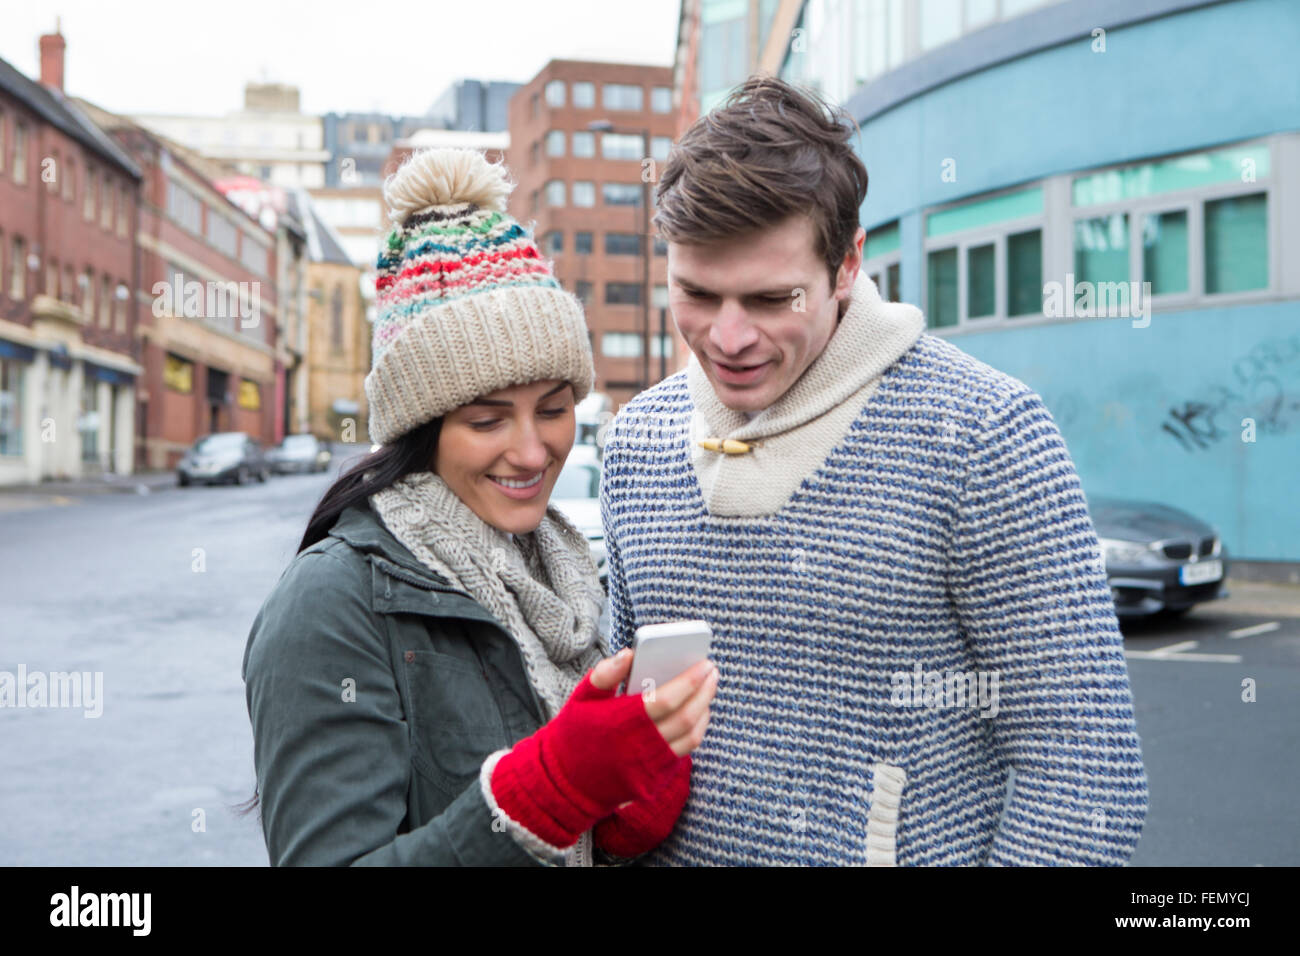 Young couple standing together in the cold weather, looking at a smartphone Stock Photo